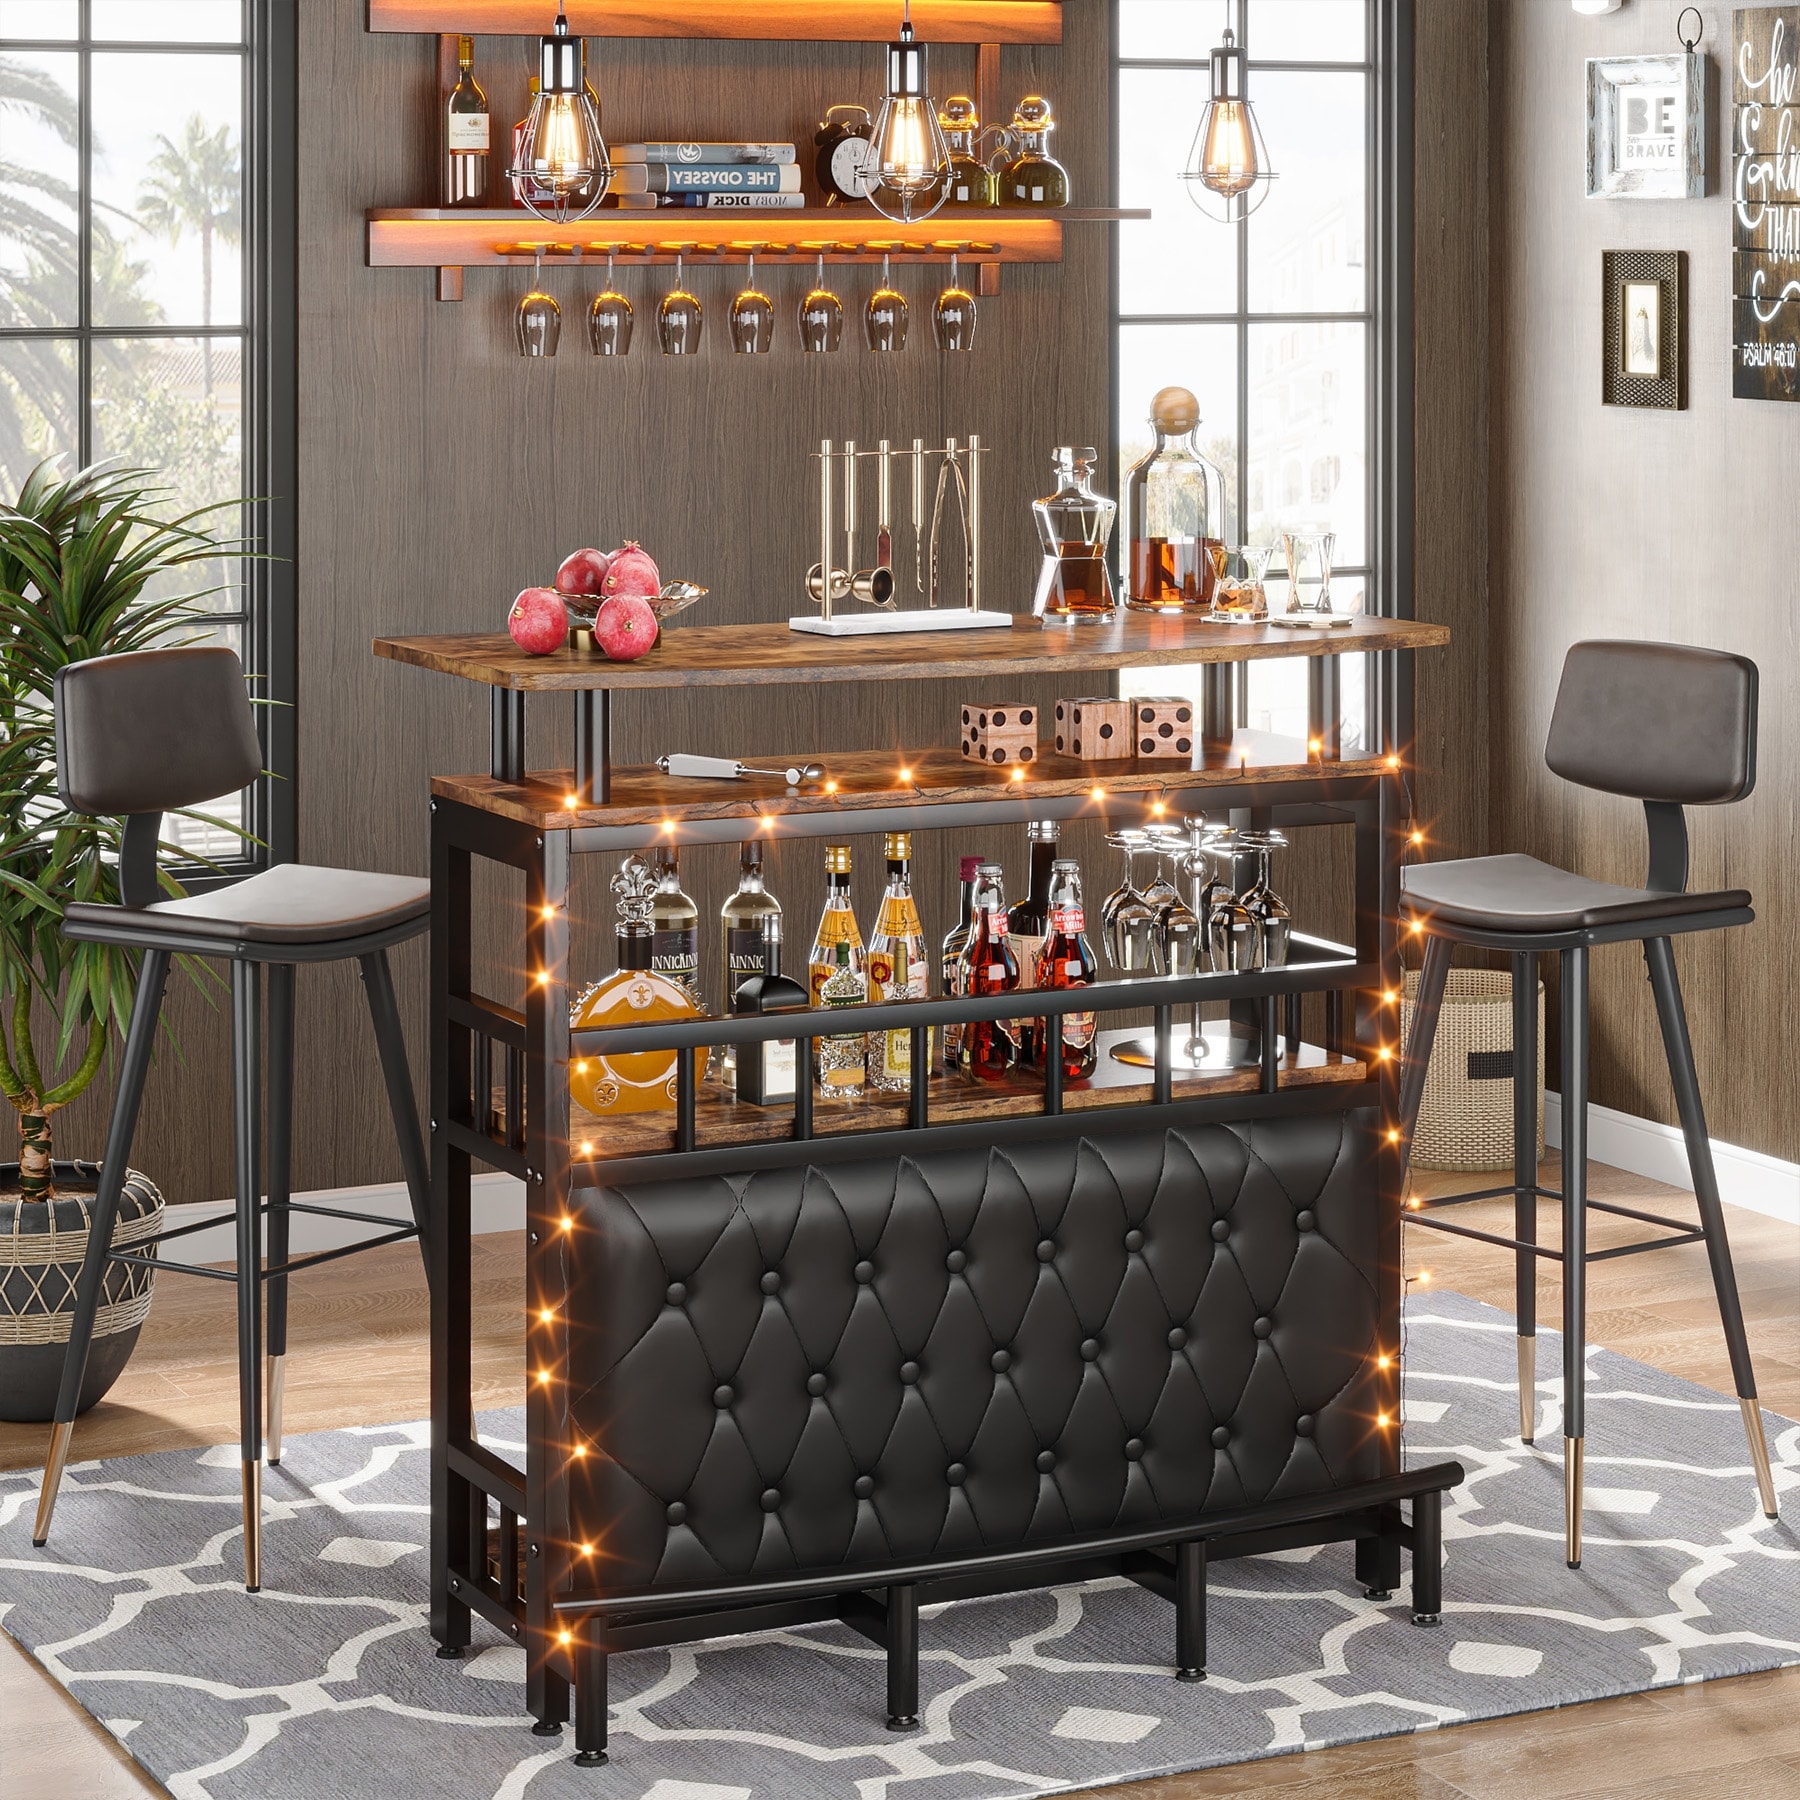 https://ak1.ostkcdn.com/images/products/is/images/direct/beb392ed95bf4cf4a161f989ca2d074ecafe5f34/Home-Bar-Unit%2C4-Tier-Liquor-Bar-Table-with-Storage-and-Footrest%2CBar-Organizer-Table-for-Home-Bar.jpg